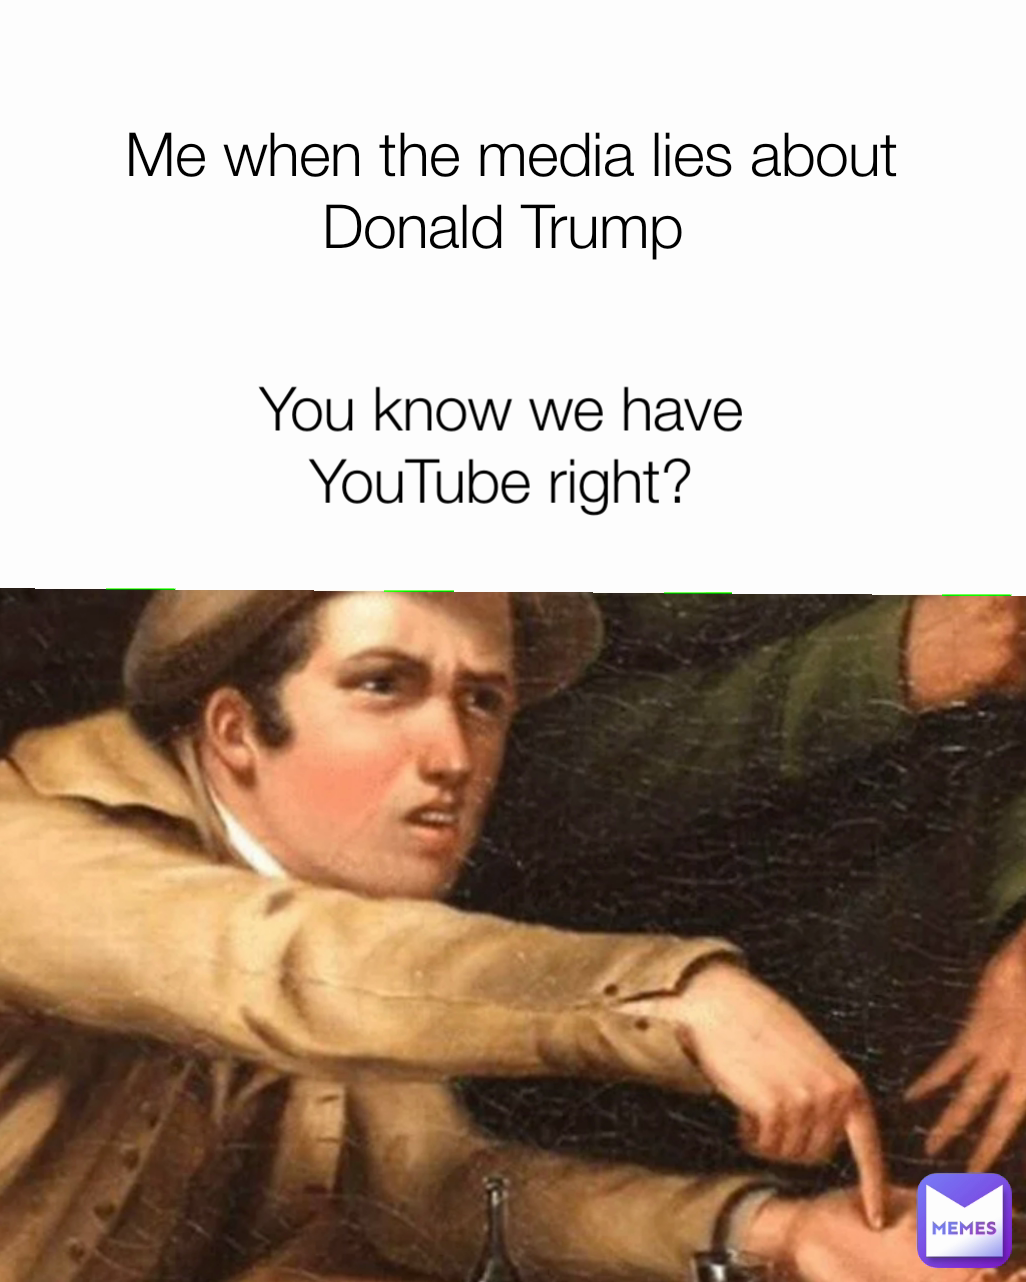 You know we have YouTube right? Me when the media lies about Donald Trump 